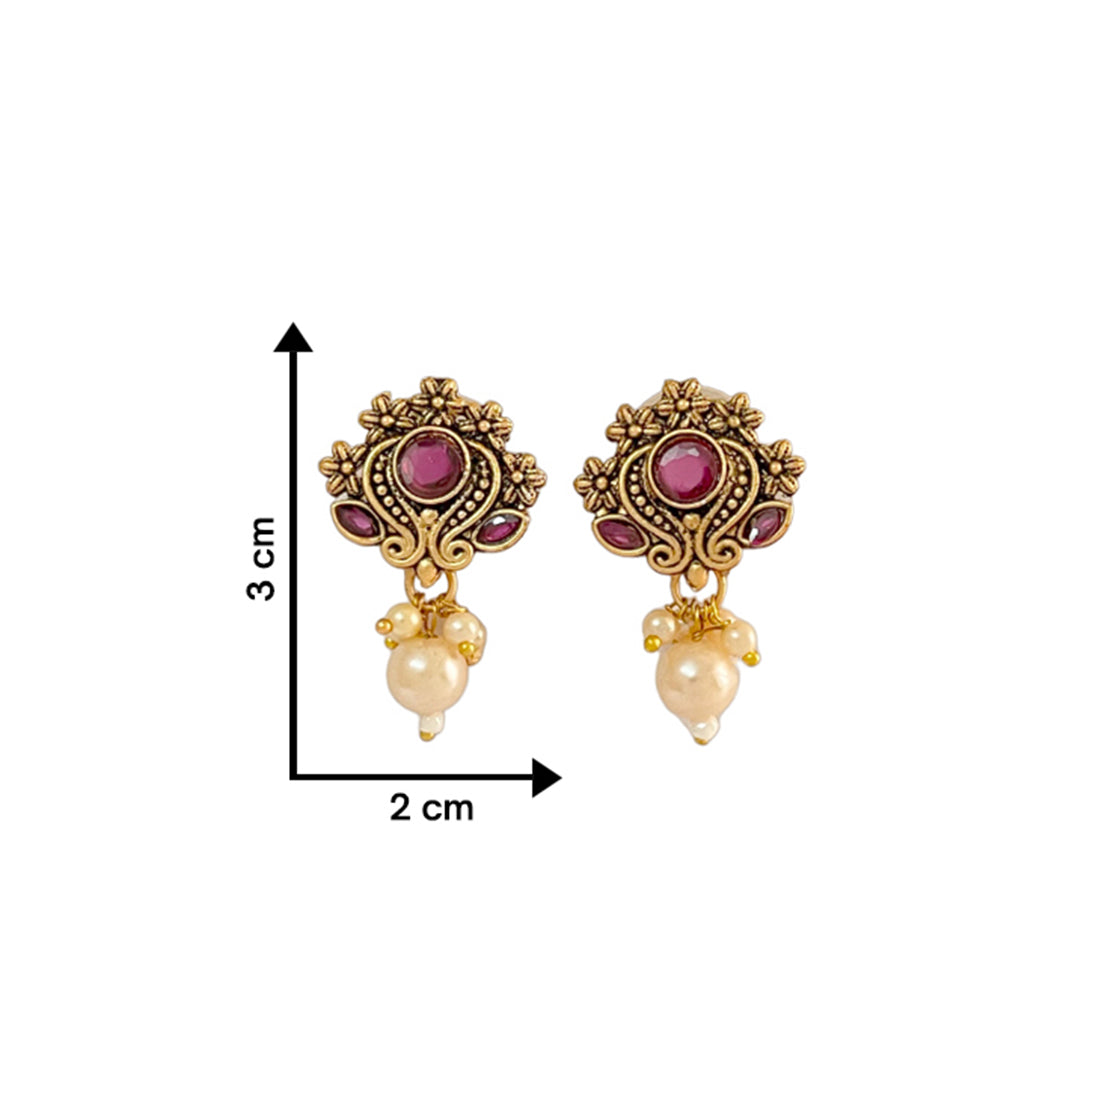 Ethnic Oxidized Maroon Rhinestones Gold-Toned Studs with Pearl Drop Earrings